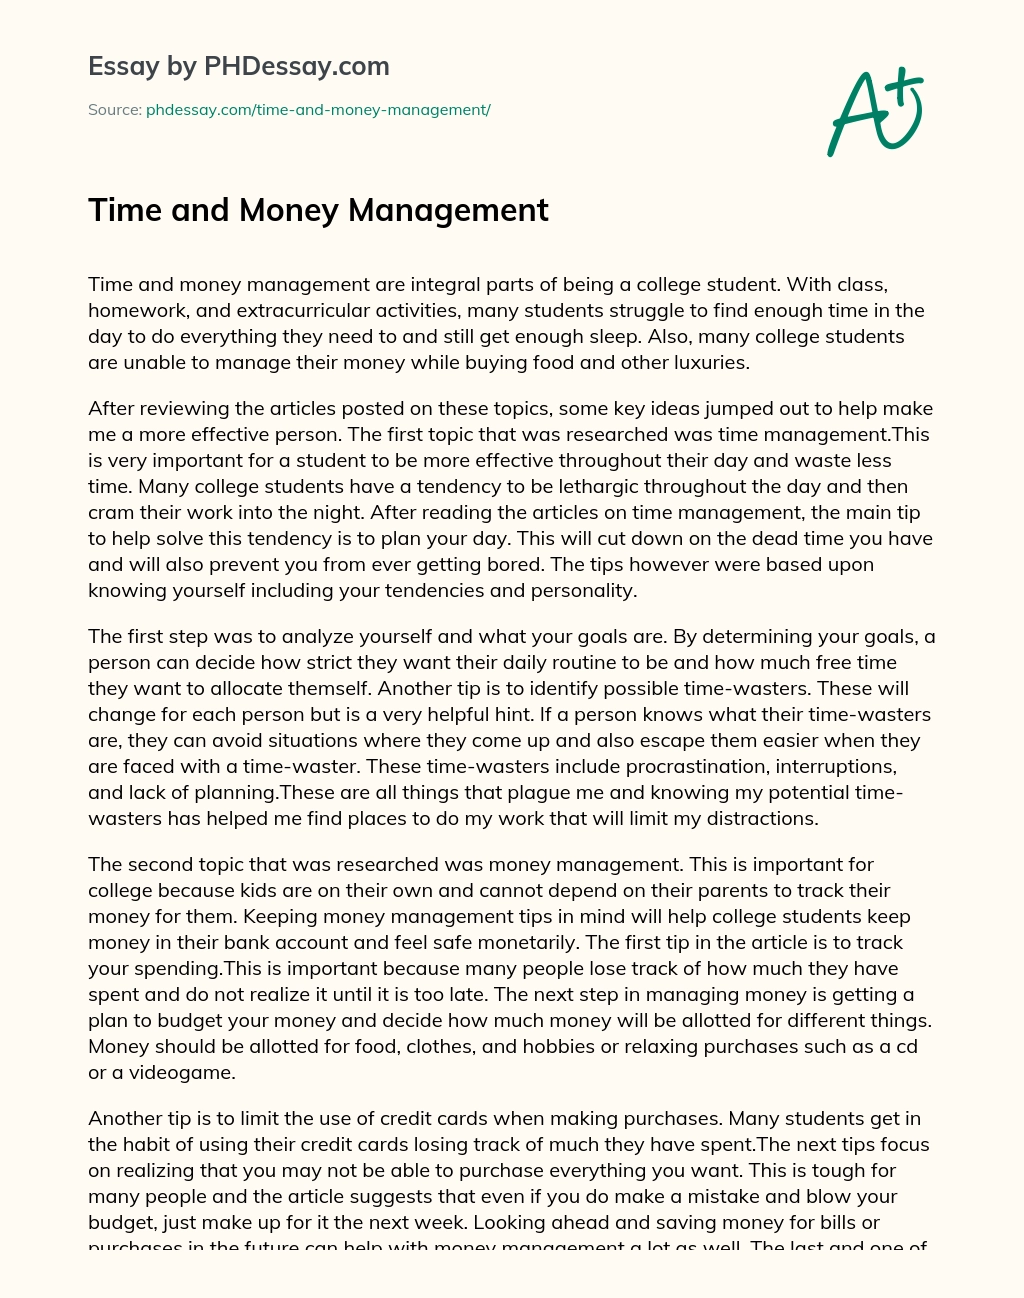 Time and Money Management essay